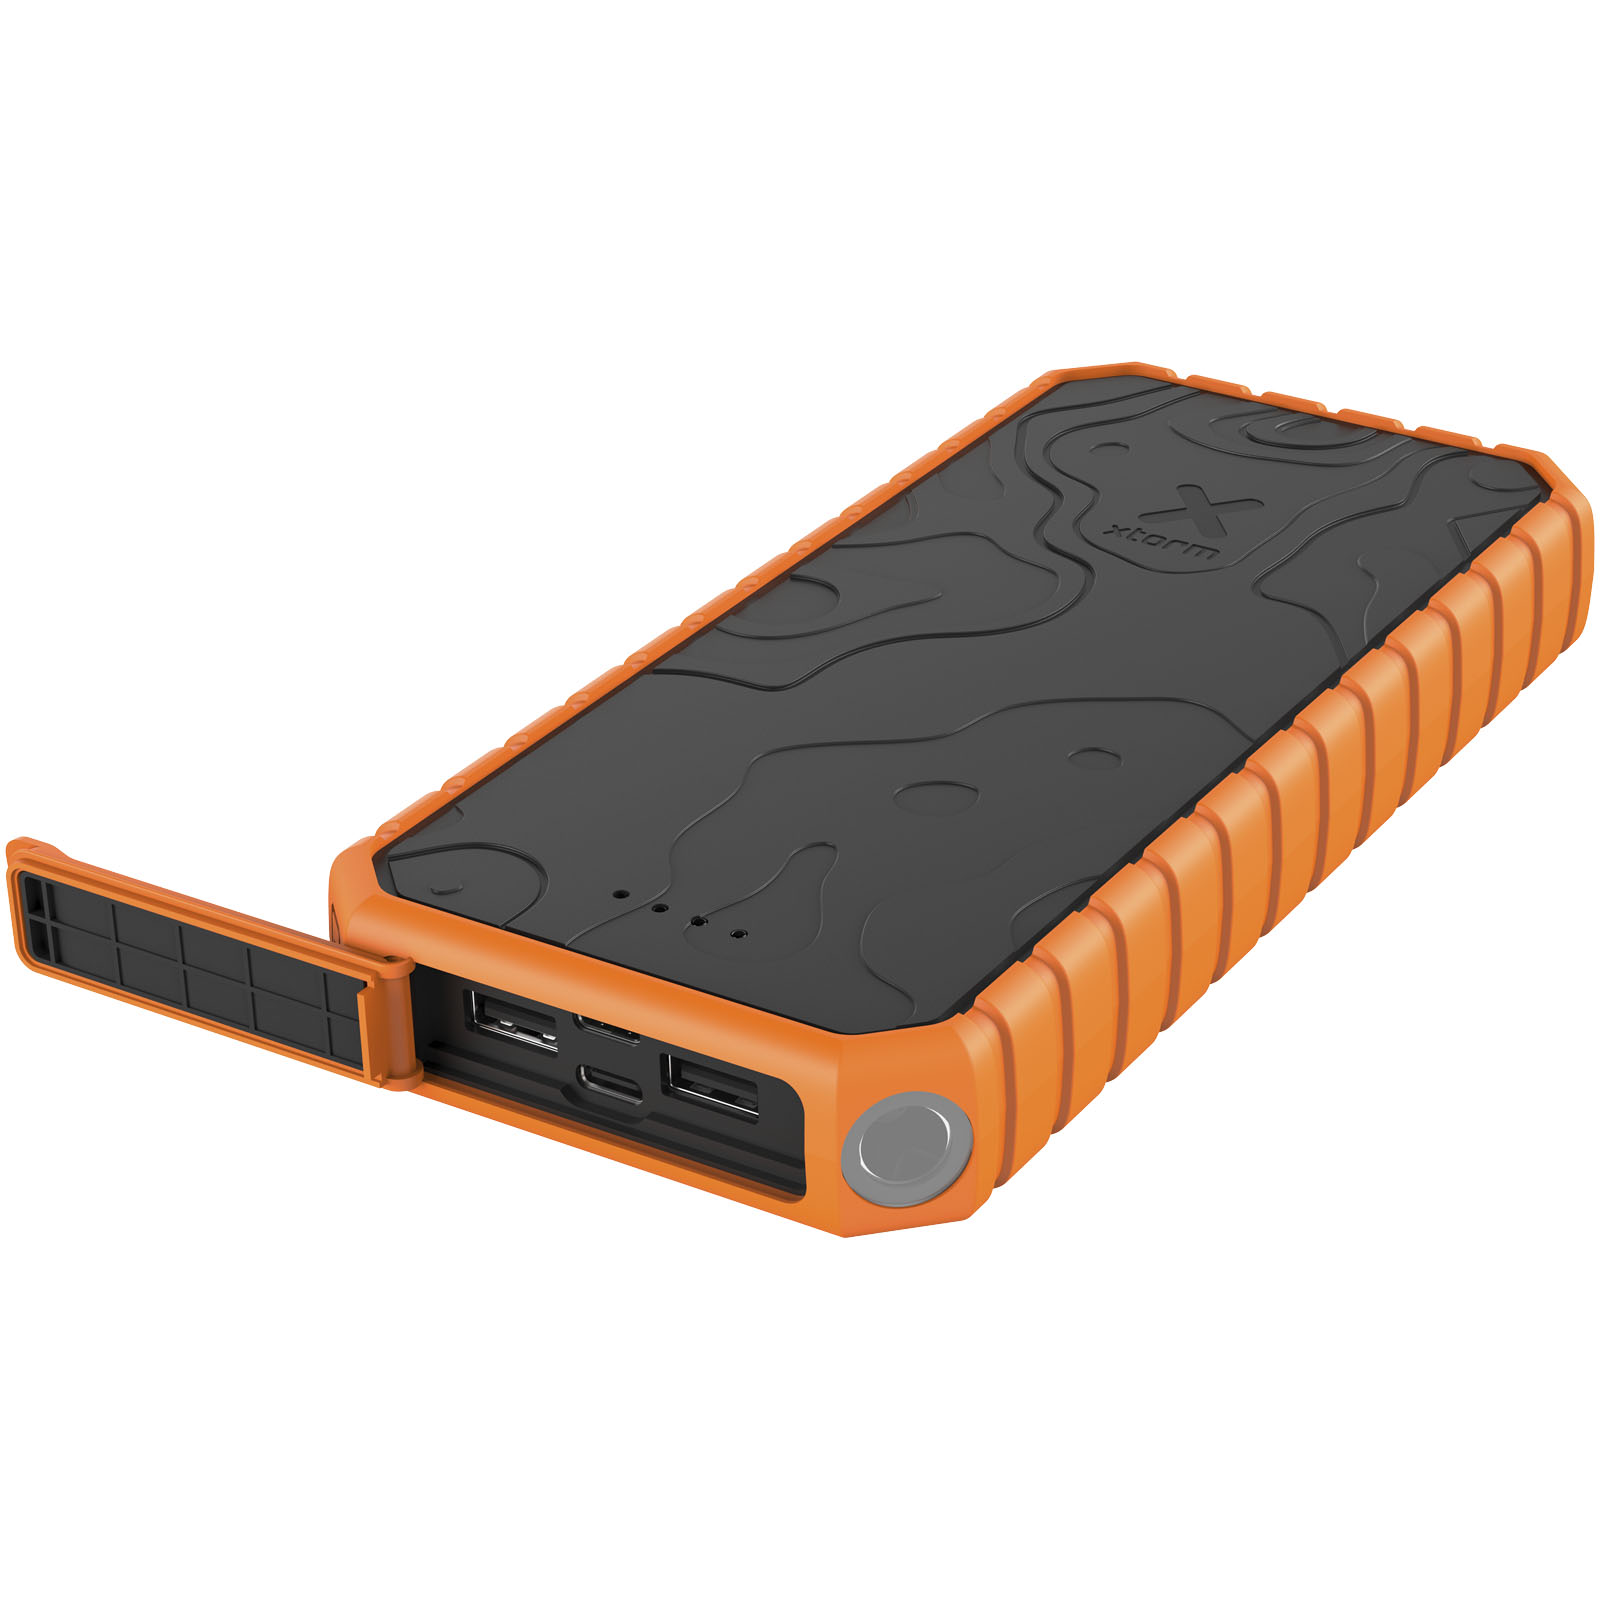 Advertising Powerbanks - Xtorm XR202 Xtreme 20.000 mAh 35W QC3.0 waterproof rugged power bank with torch - 4